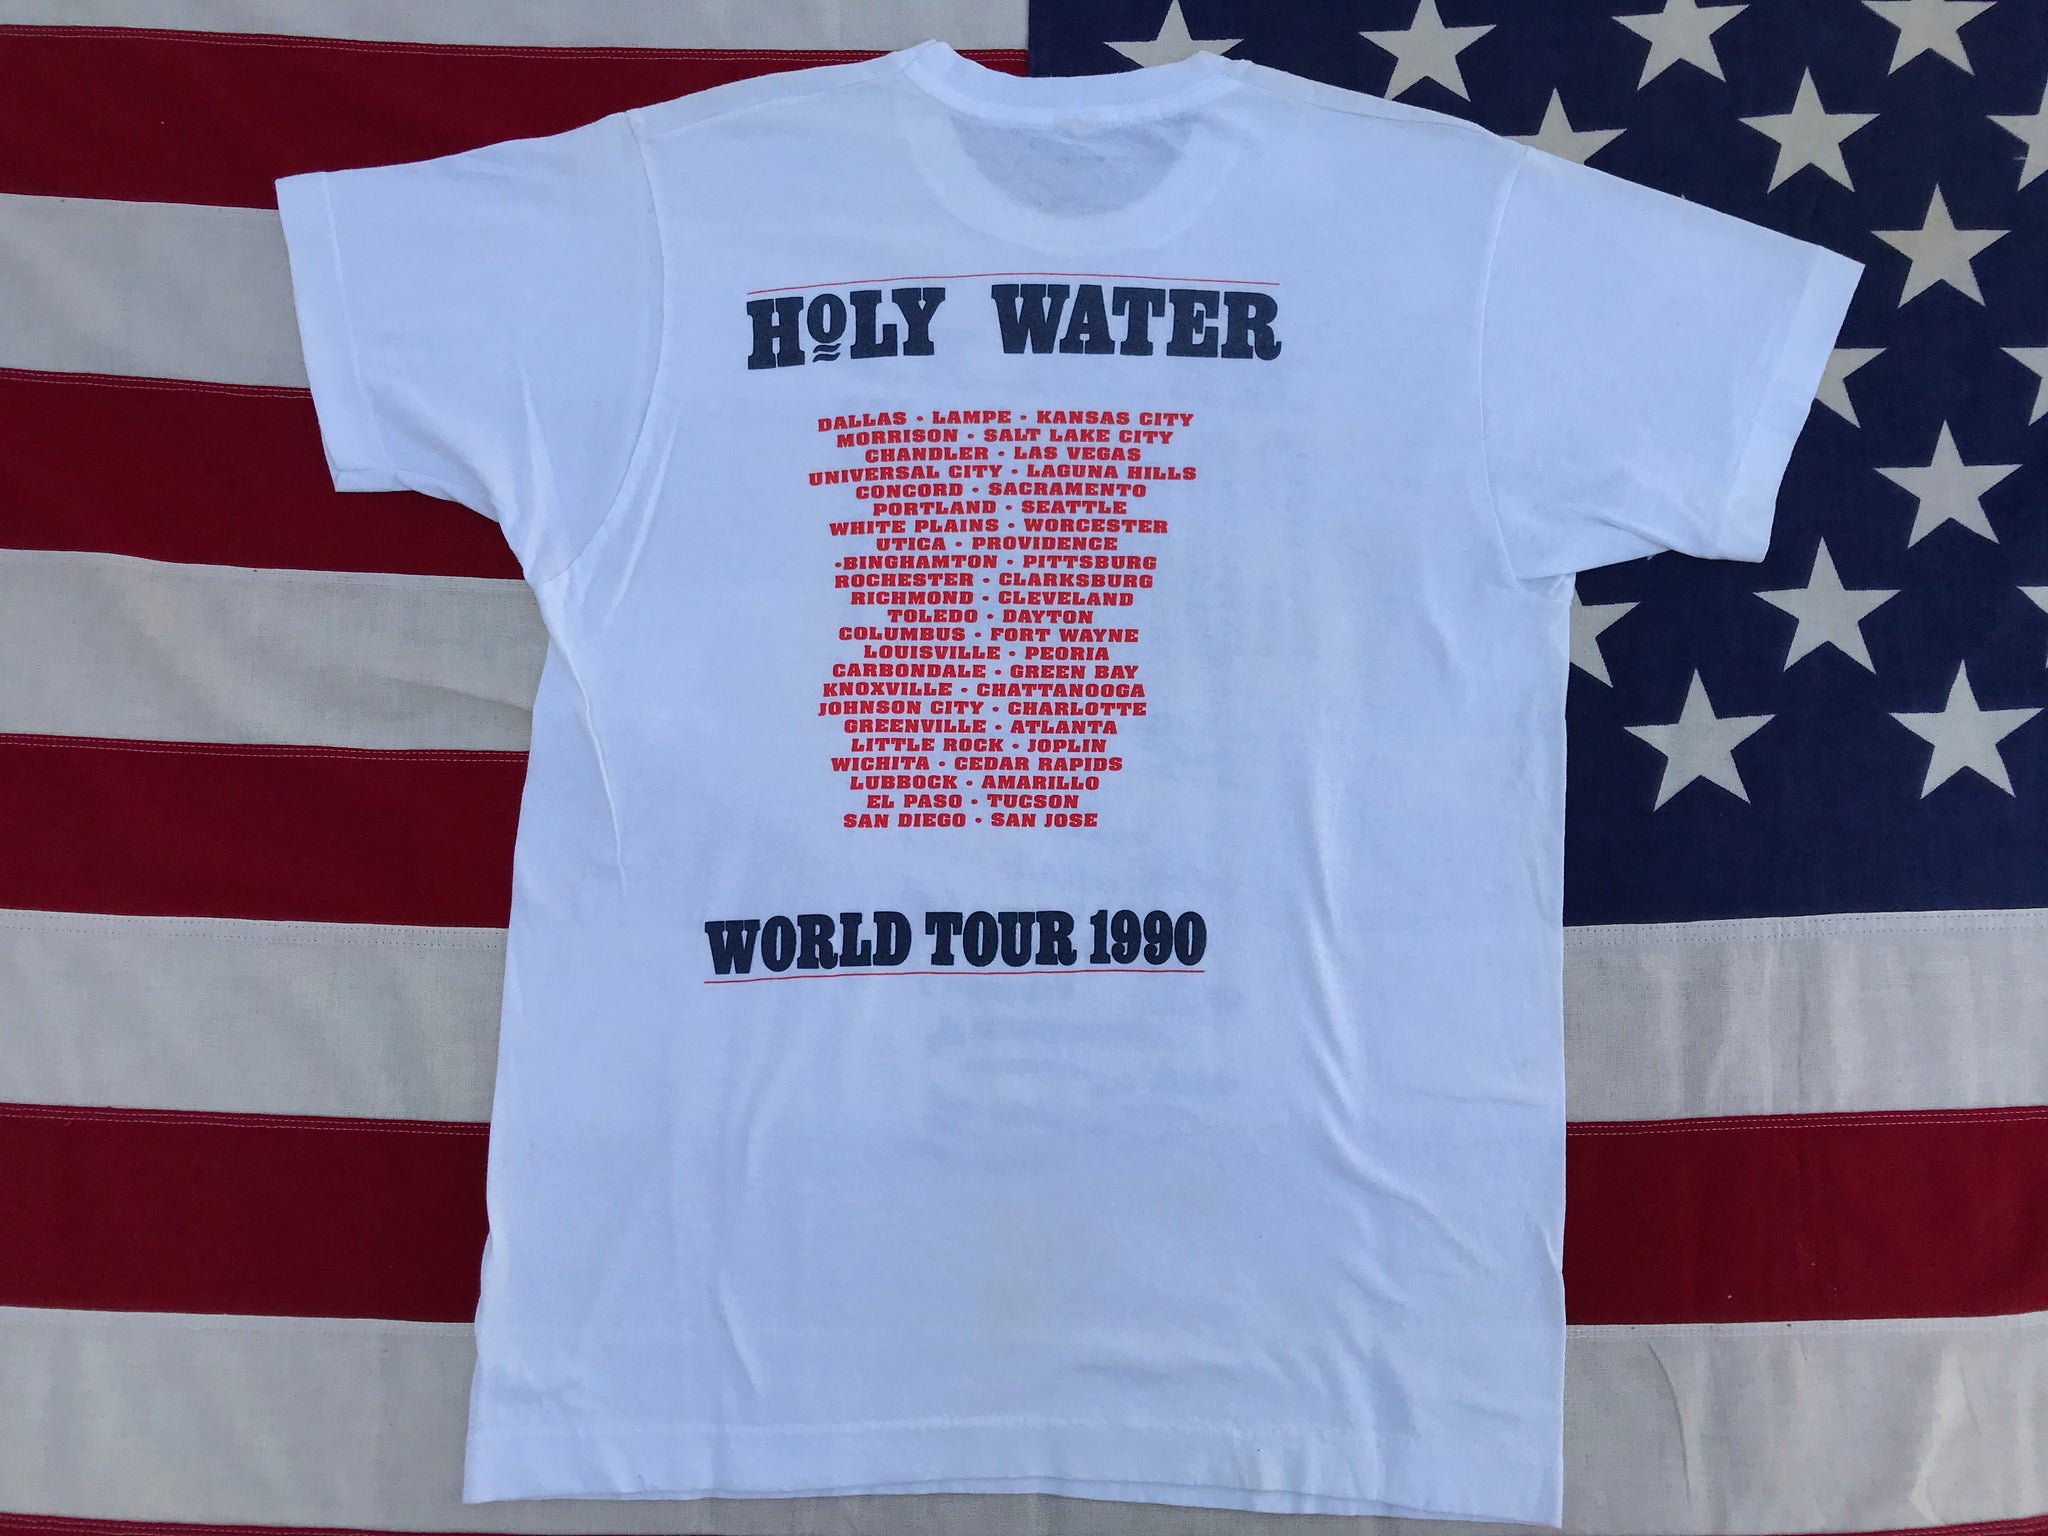 Bad Company  “ Holy Water “ World Tour 1990 Original Vintage Rock T-Shirt by Screen Stars USA